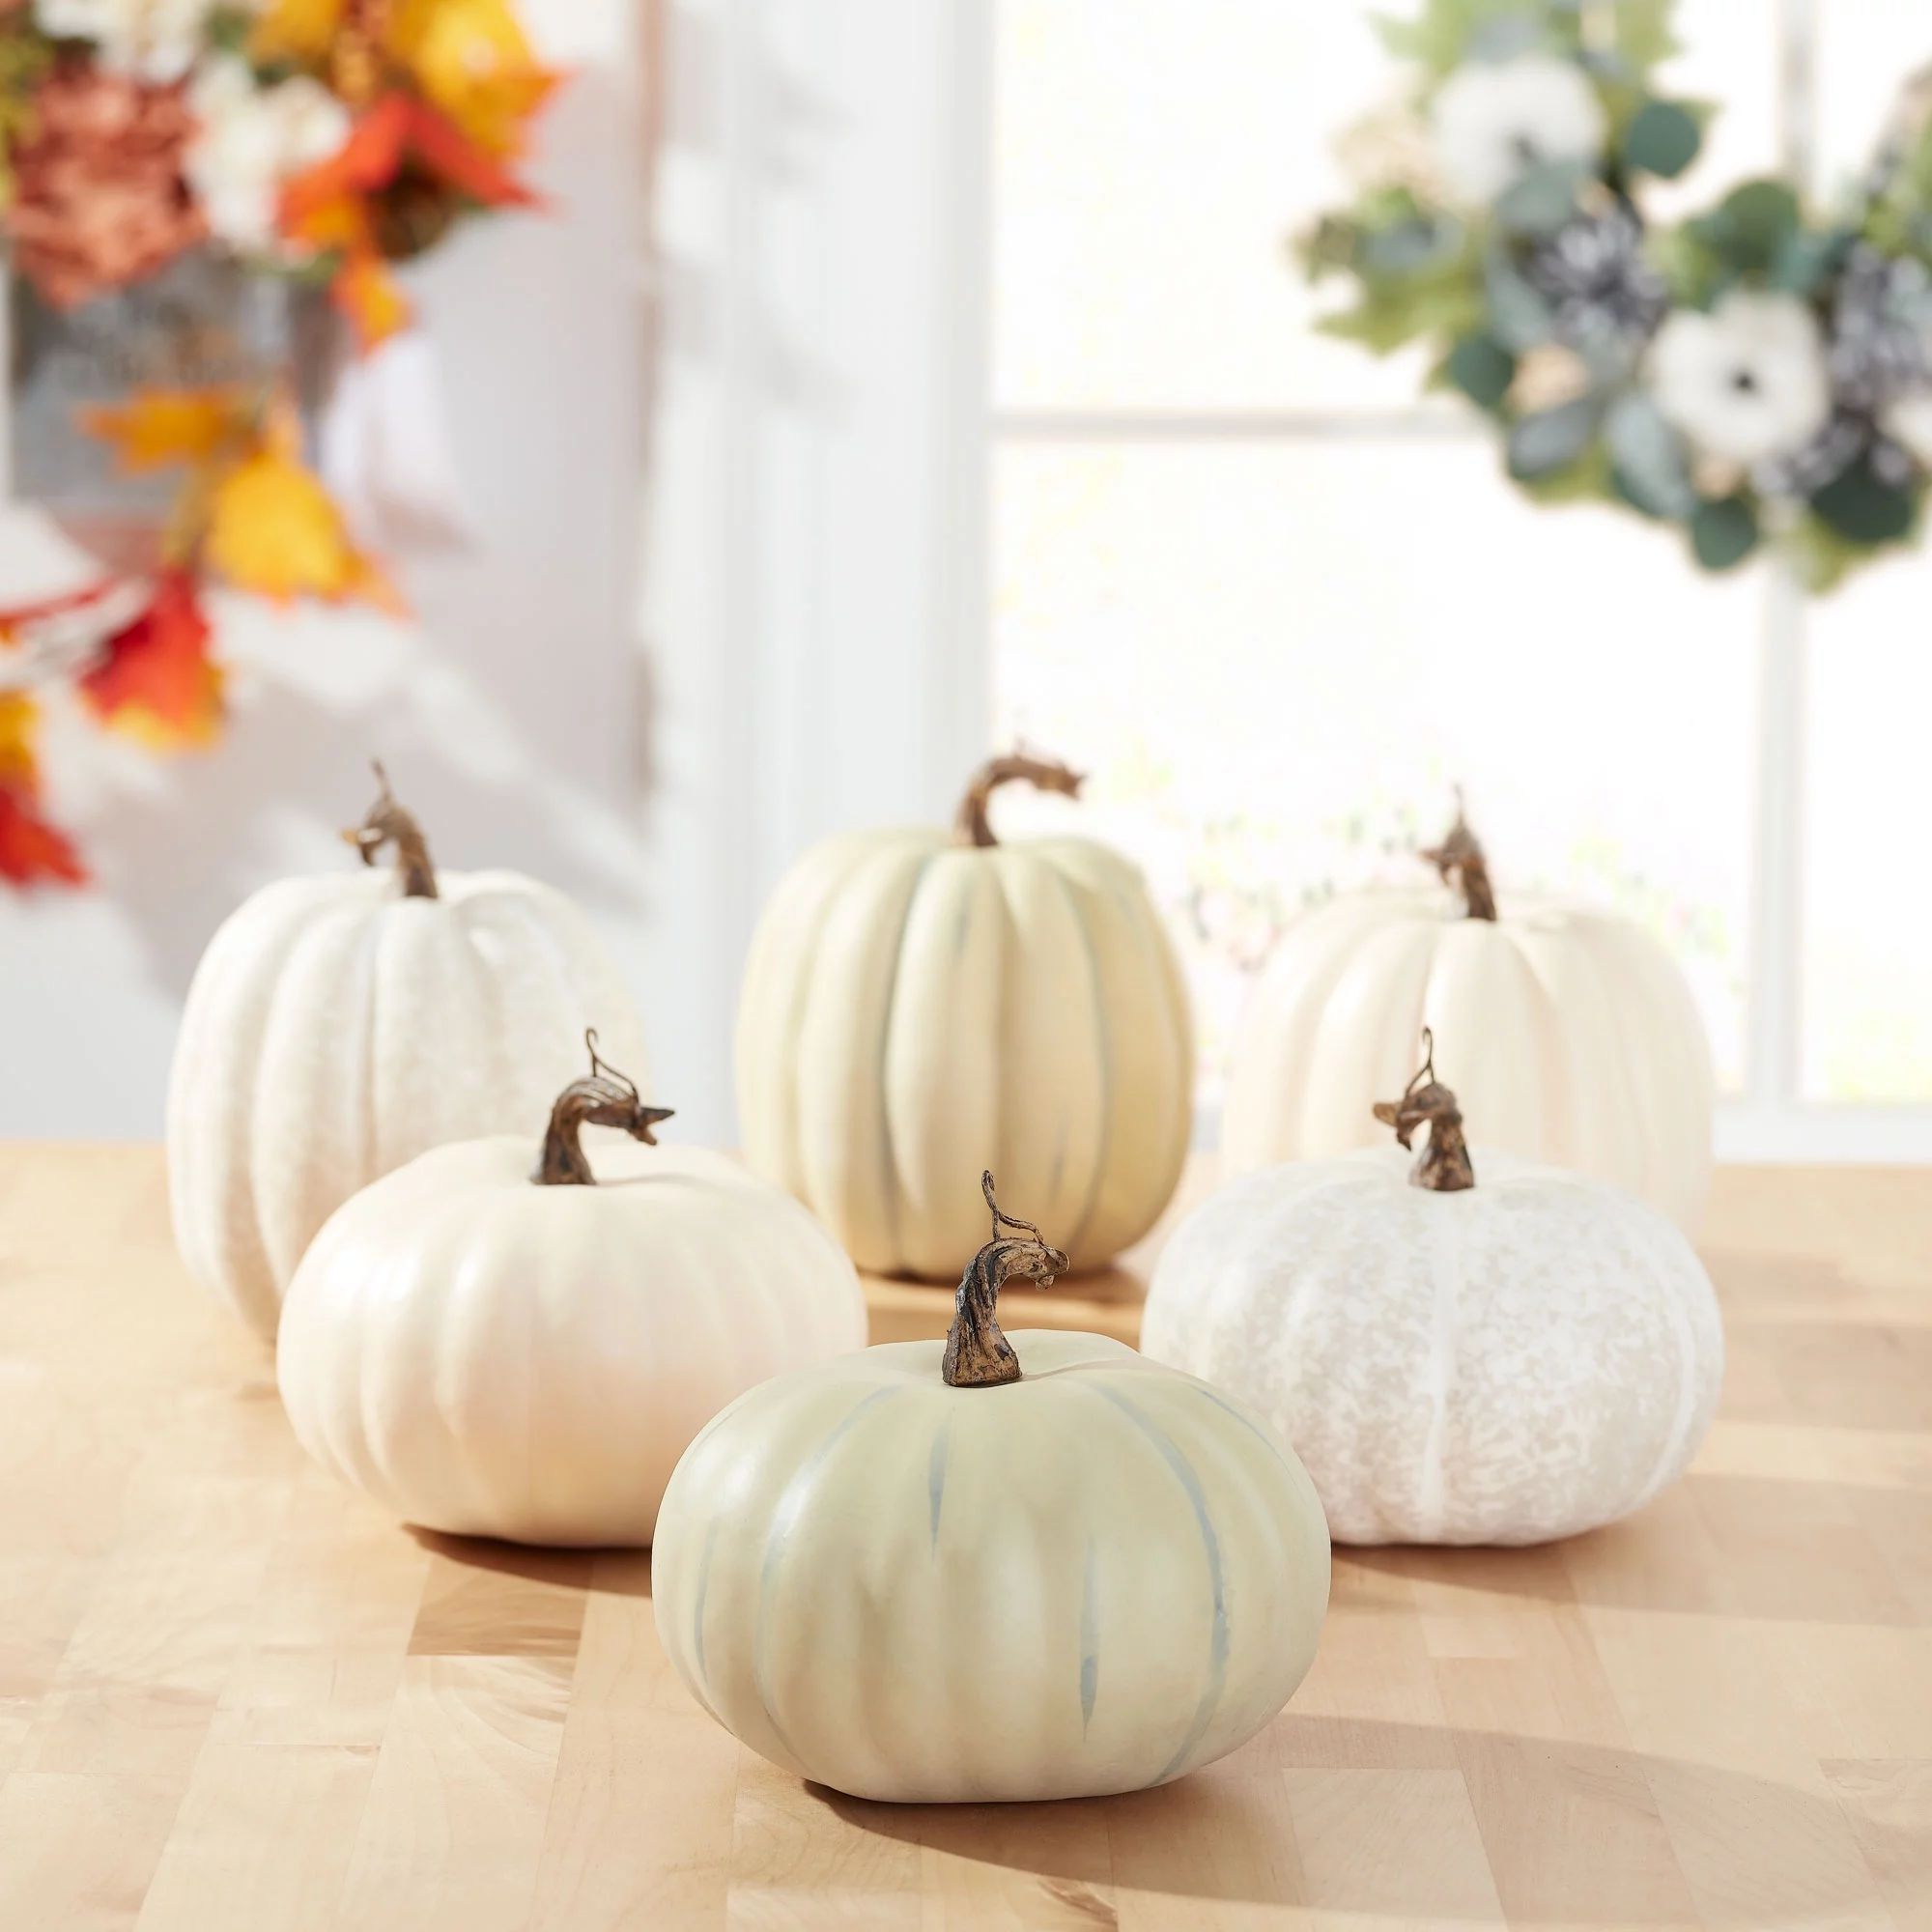 Way to Celebrate Harvest Foam Natural Decoration Pumpkin, Set of 6 in White/Green Color, 5” tal... | Walmart (US)